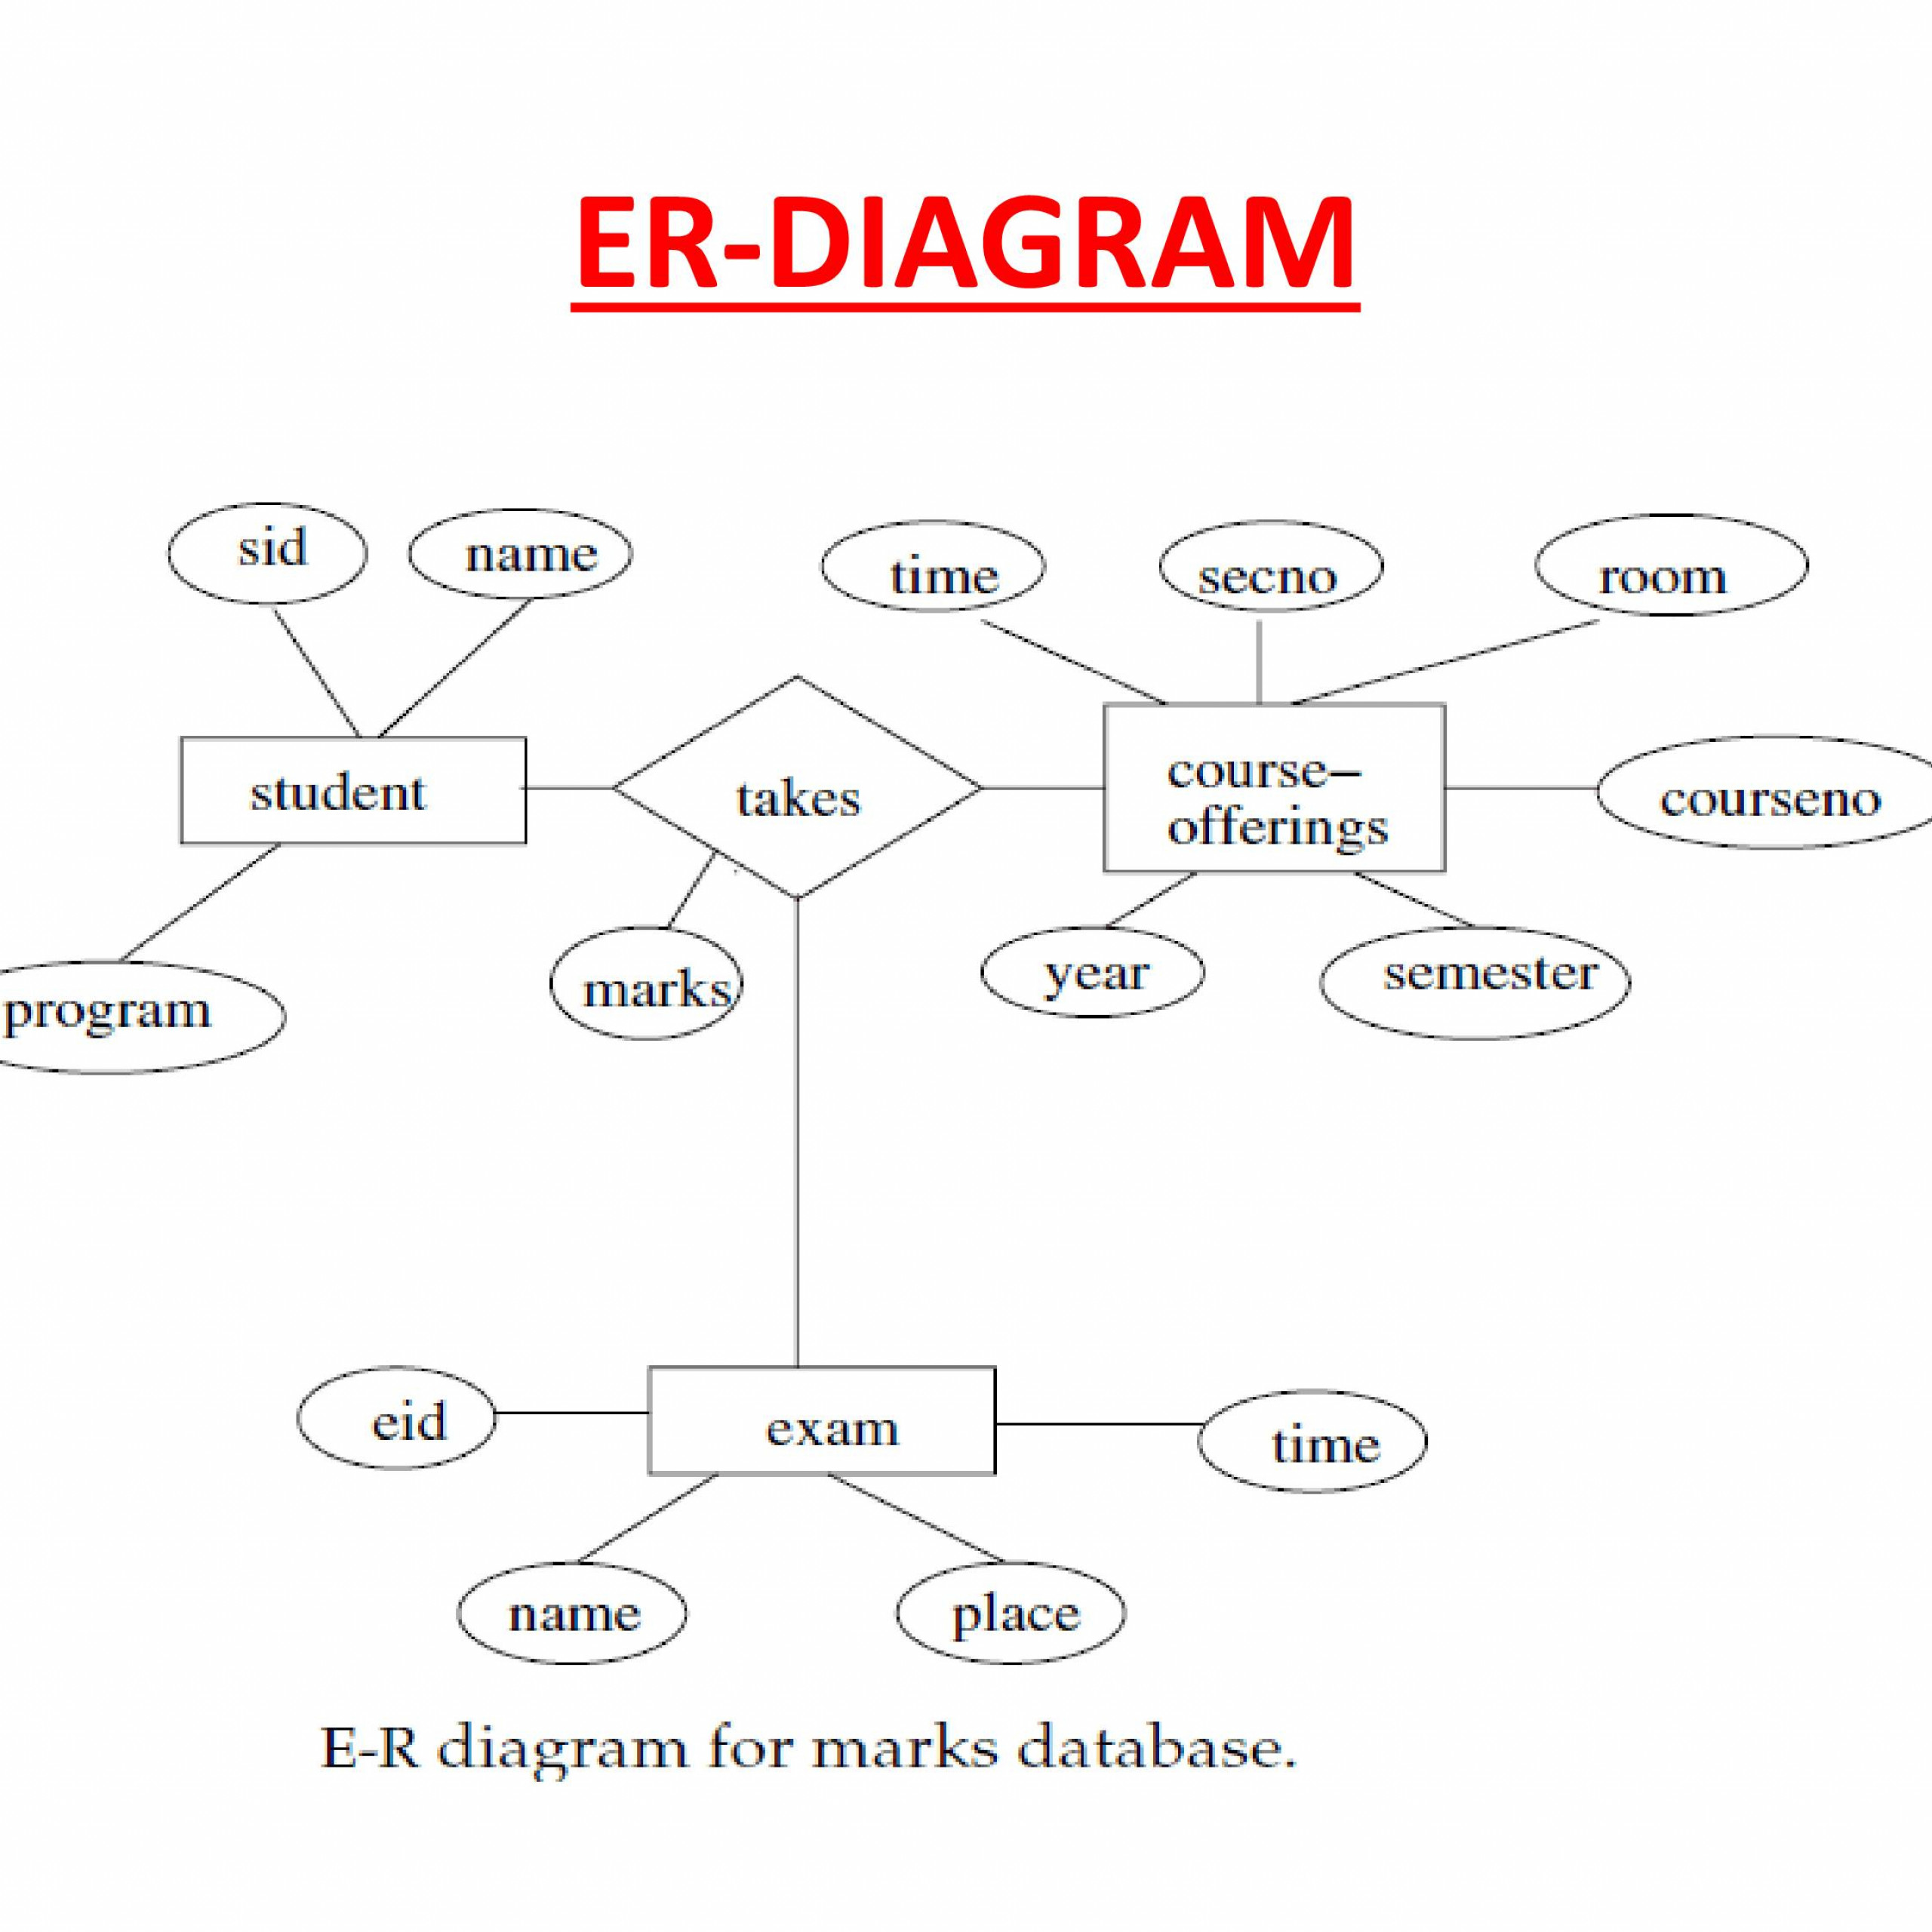 er diagram question and solution pdf to jpg